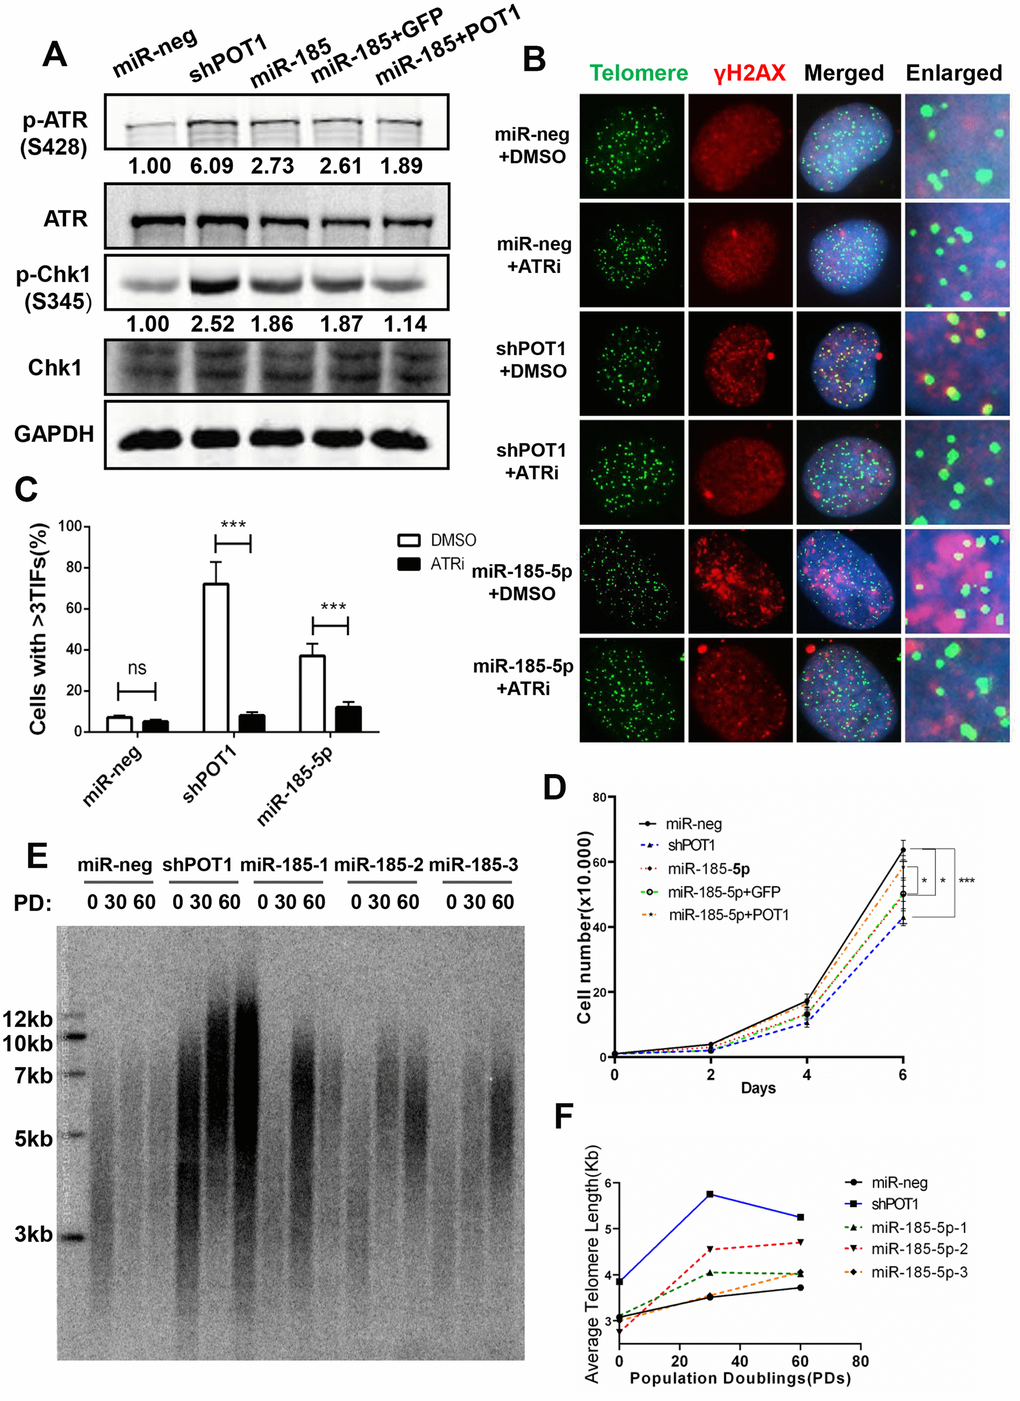 MiR-185 increases telomere dysfunction via the ATR signaling pathway in cancer cells. (A) ATR protein levels and phosphorylated Chk1 levels in POT1 knockdown, miR-185 overexpression and POT1 rescue HTC75 cells. Total Chk1 was blotted as a loading control. (B) After treatment with the ATR kinase inhibitor VE-821, the POT1 knockdown, miR-185 overexpression and control HTC75 cells were examined by immunostaining using anti-γ-H2AX antibody and fluorescence in situ hybridization using the TTAGGG telomere probe. (C) Quantification of the percentage of cells in (B) with more than 3 TIFs. Error bars indicate standard deviations (n=3). (D) Growth curve of HTC75 cells stably infected with viruses encoding empty vector (miR-Neg), shPOT1, miR-185, miR-185 plus GFP, or miR-185 plus POT1 at different time points. (E) Telomere restriction fragment (TRF) analysis showed the telomere length of HTC75 cells stably infected with the indicated viruses at the indicated population doublings (PD 0, PD 30, PD 60). (F) Quantification of telomere length in (E).